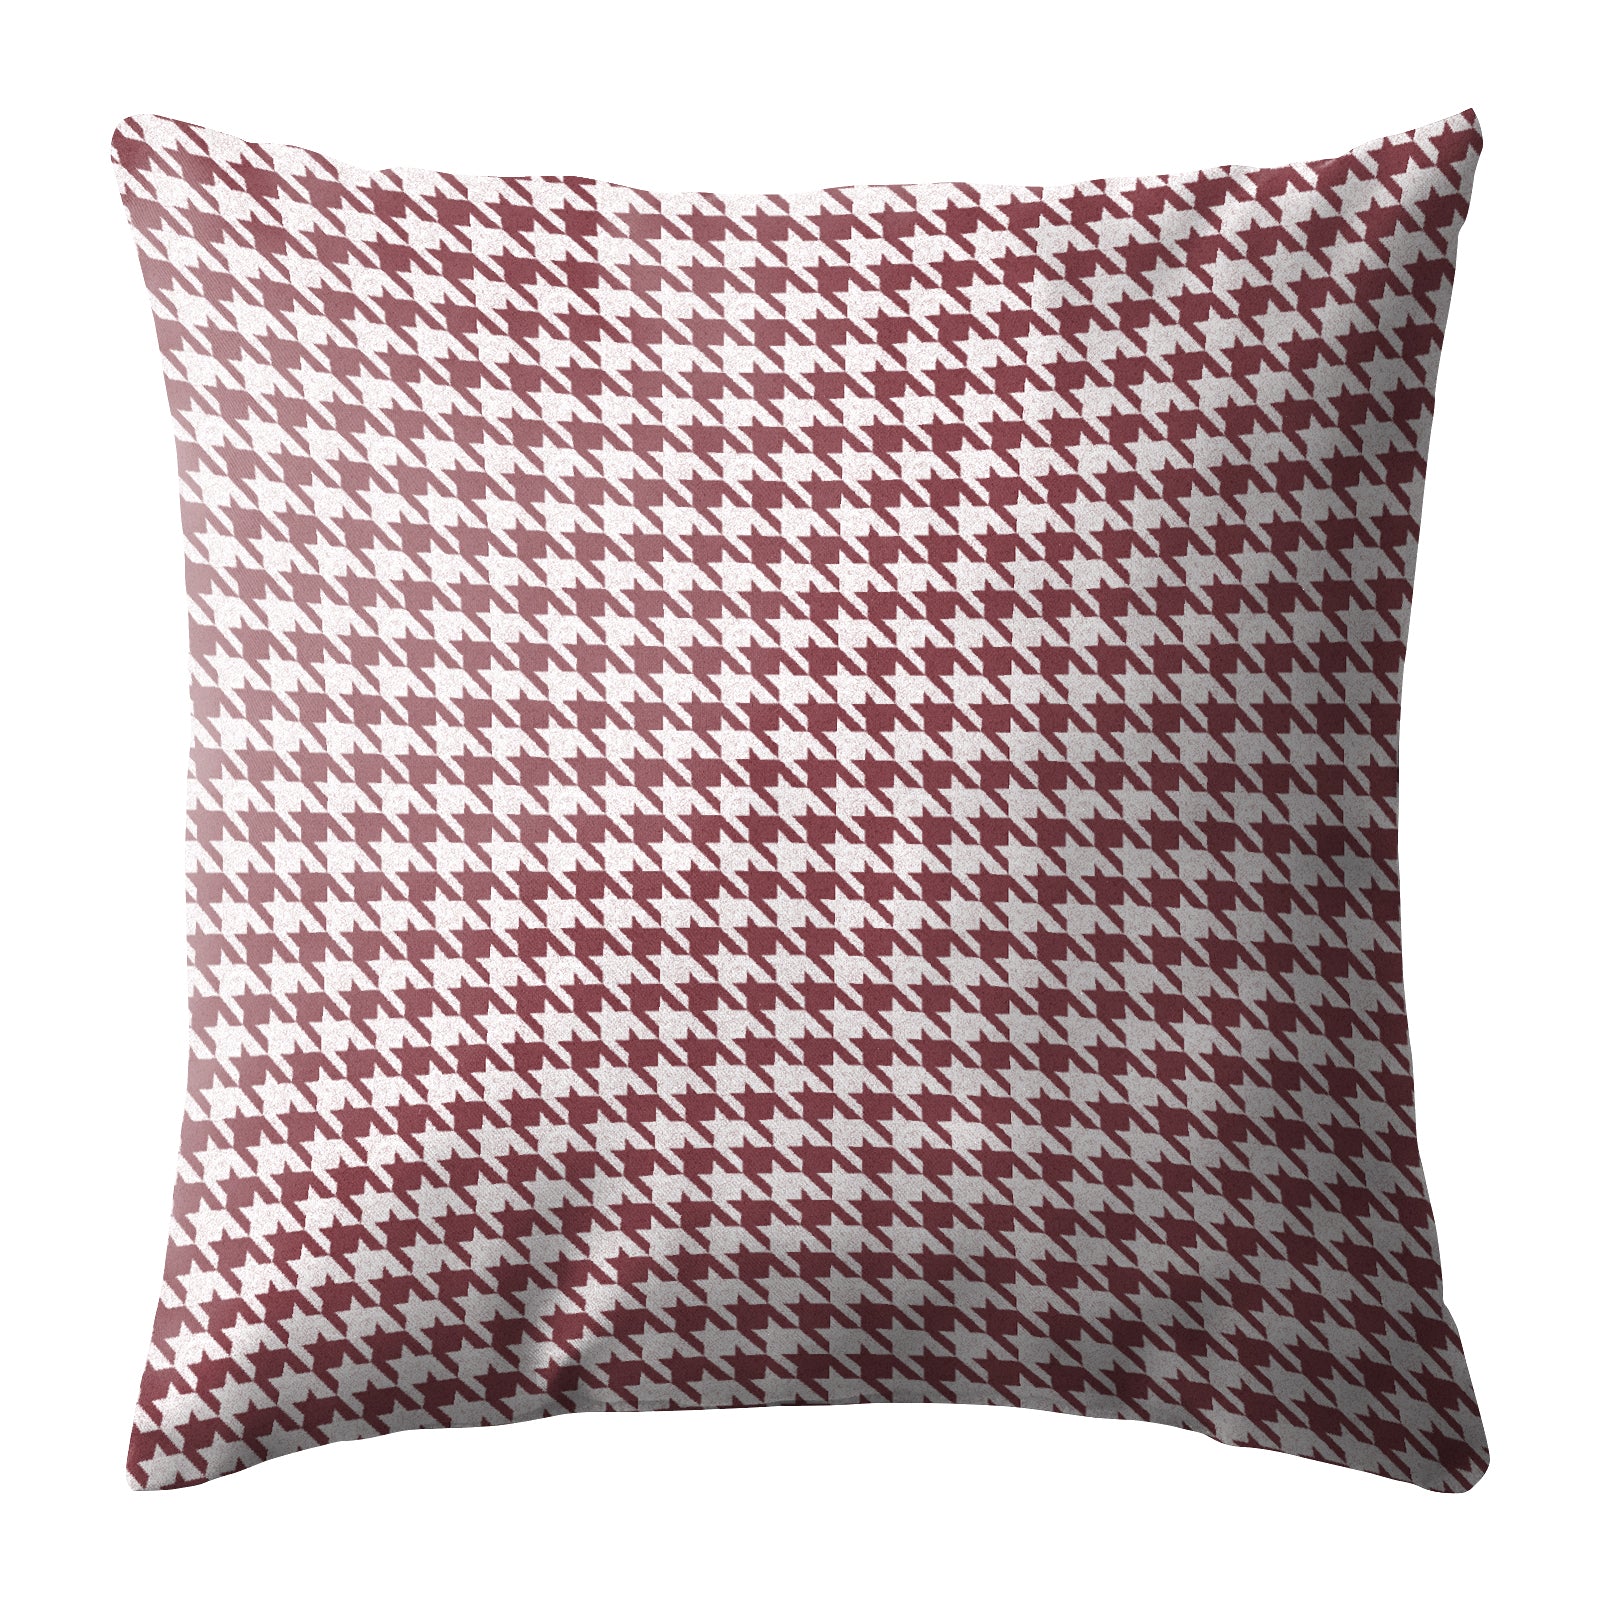 HOUNDSTOOTH M-PINK (16X16 INCH) DIGITAL PRINTED CUSHION COVER